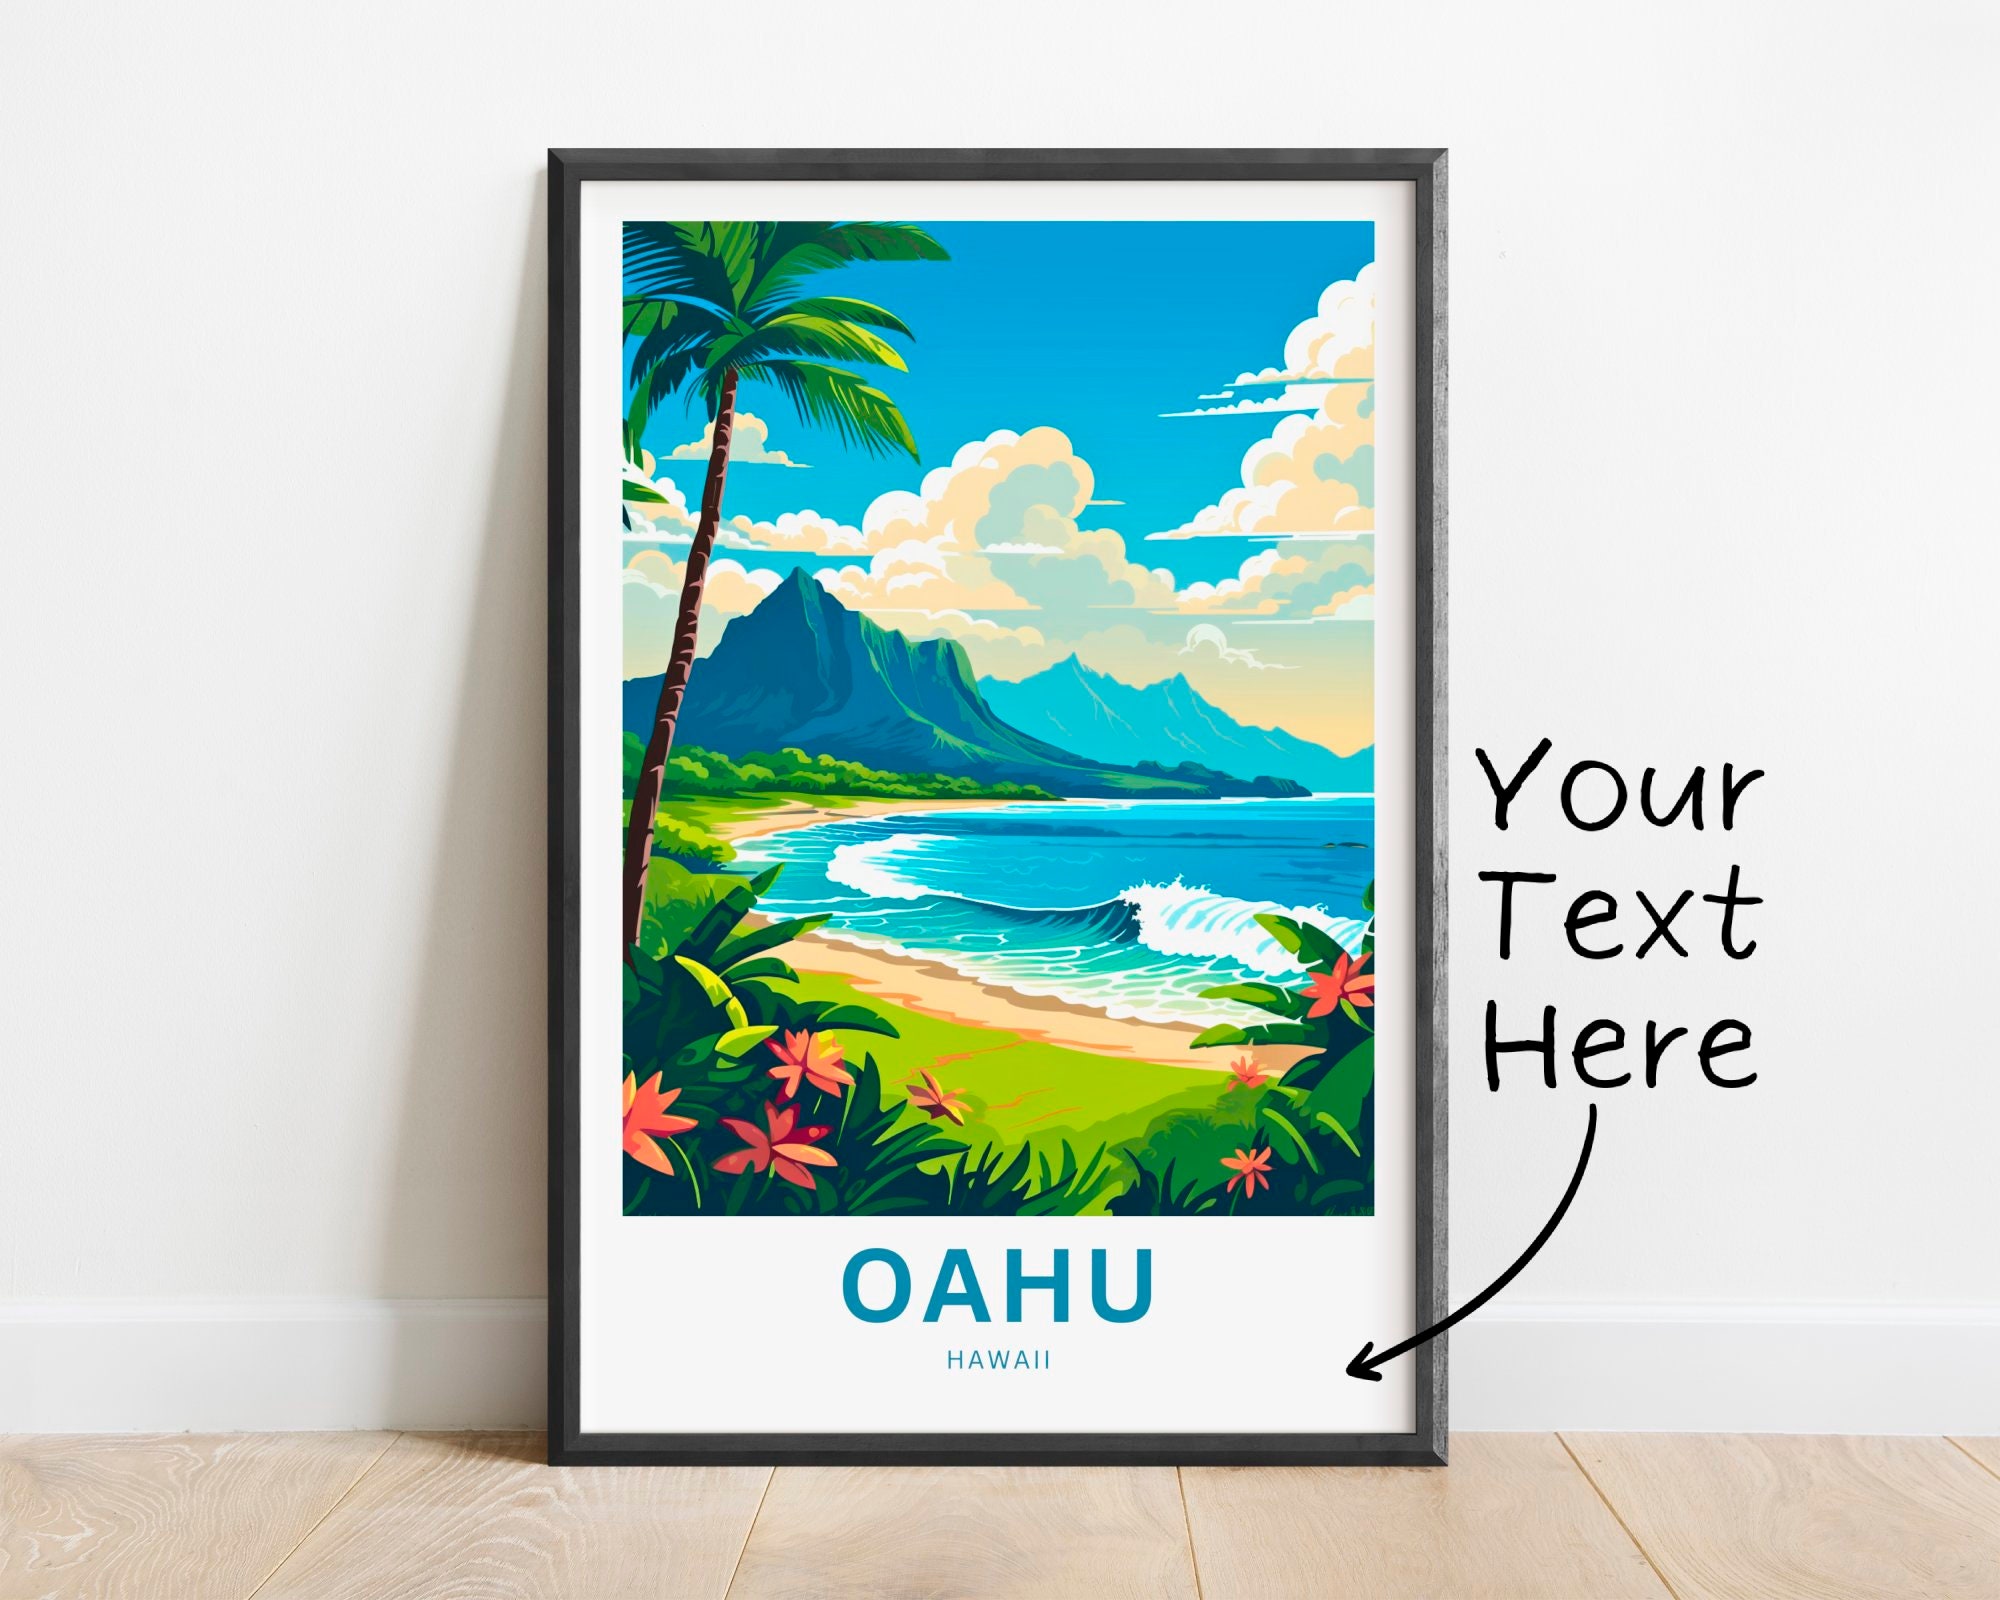 Ohuhu Marker Conversions Old 200 Oahu to New 320 Oahu Numbers 